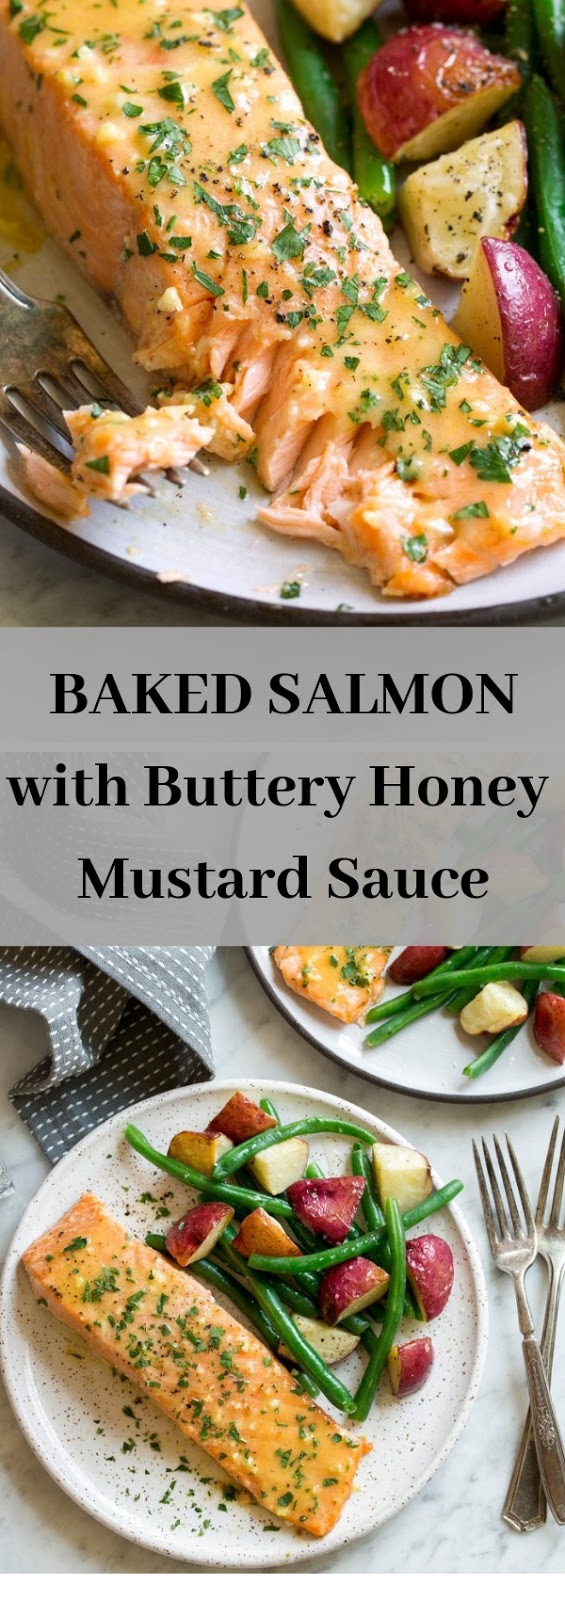 Baked Salmon with Buttery Honey Mustard Sauce